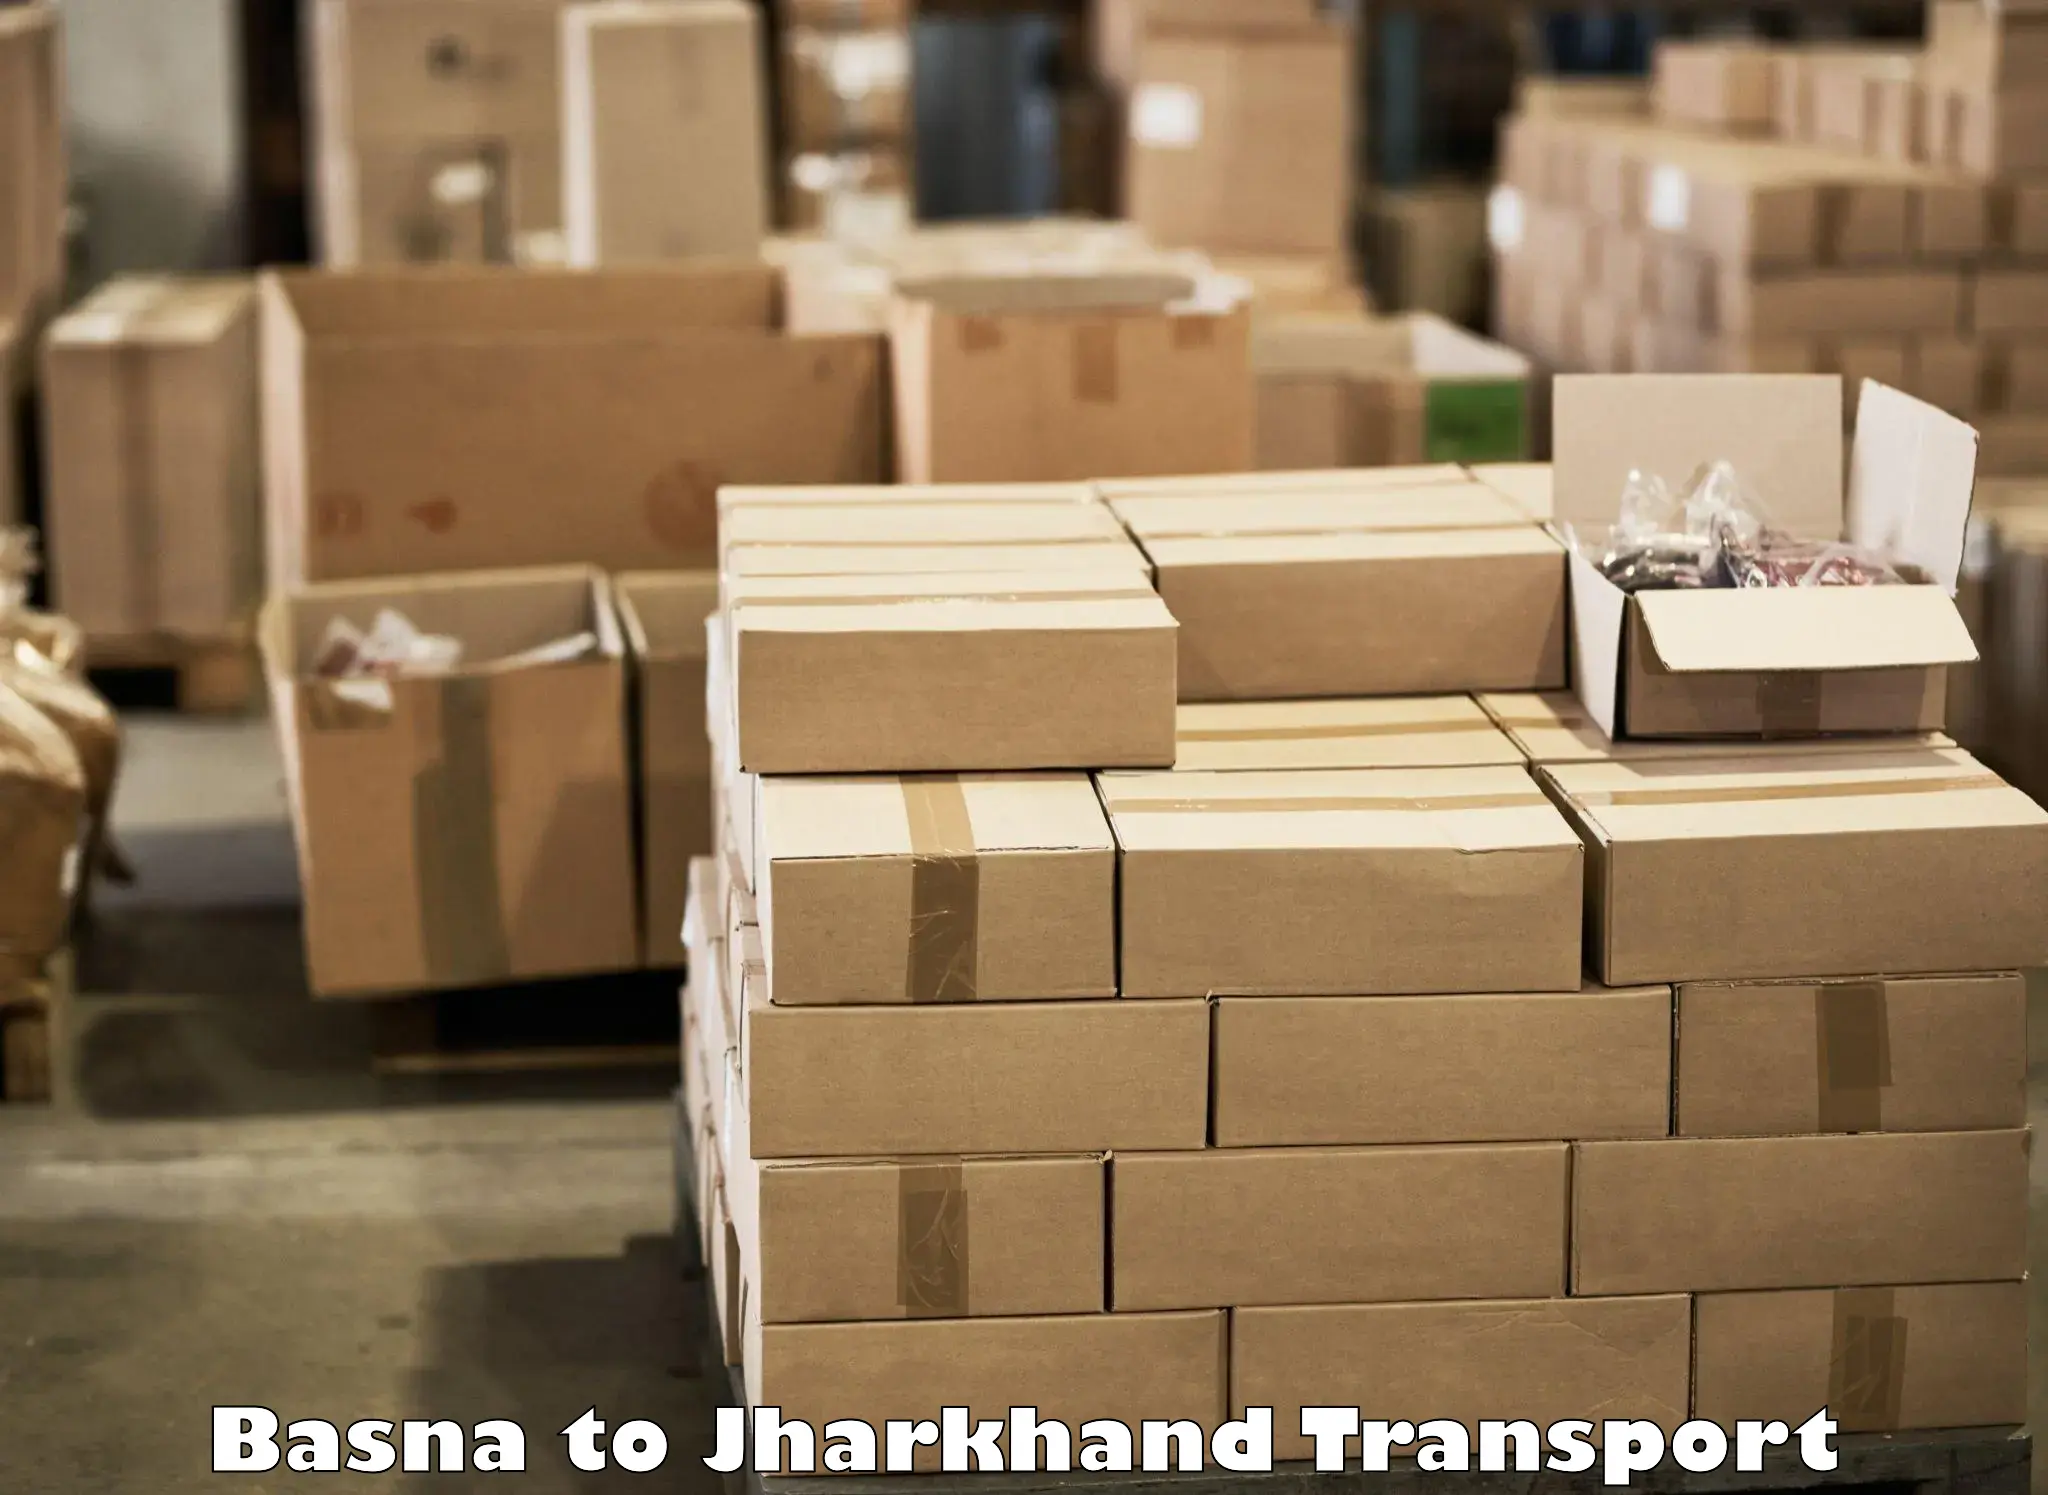 Two wheeler parcel service Basna to Dhanbad